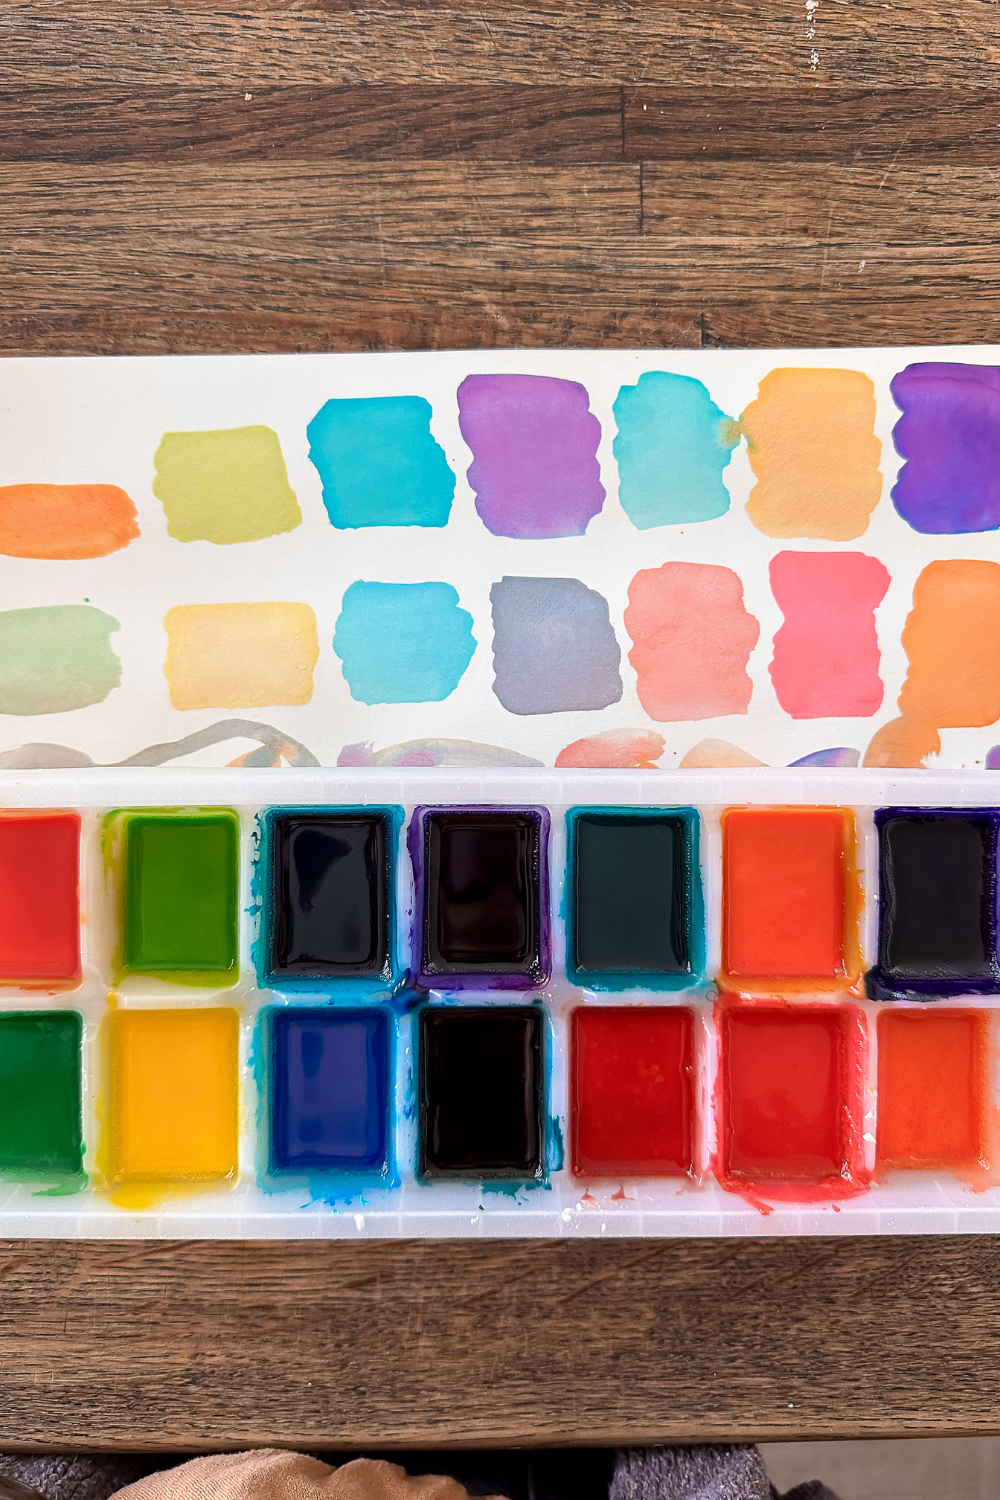 Homemade watercolor paints in a ice cube tray. Paints are swatched above the tray and the swatches are dry.